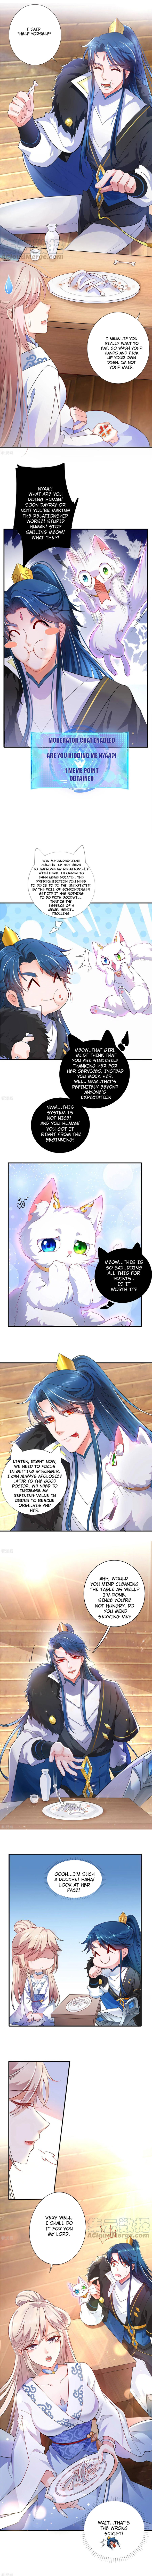 Cat System: The Emperor Is a Cat Lover Ch. 5 5 The doctor girl gave me no meme!